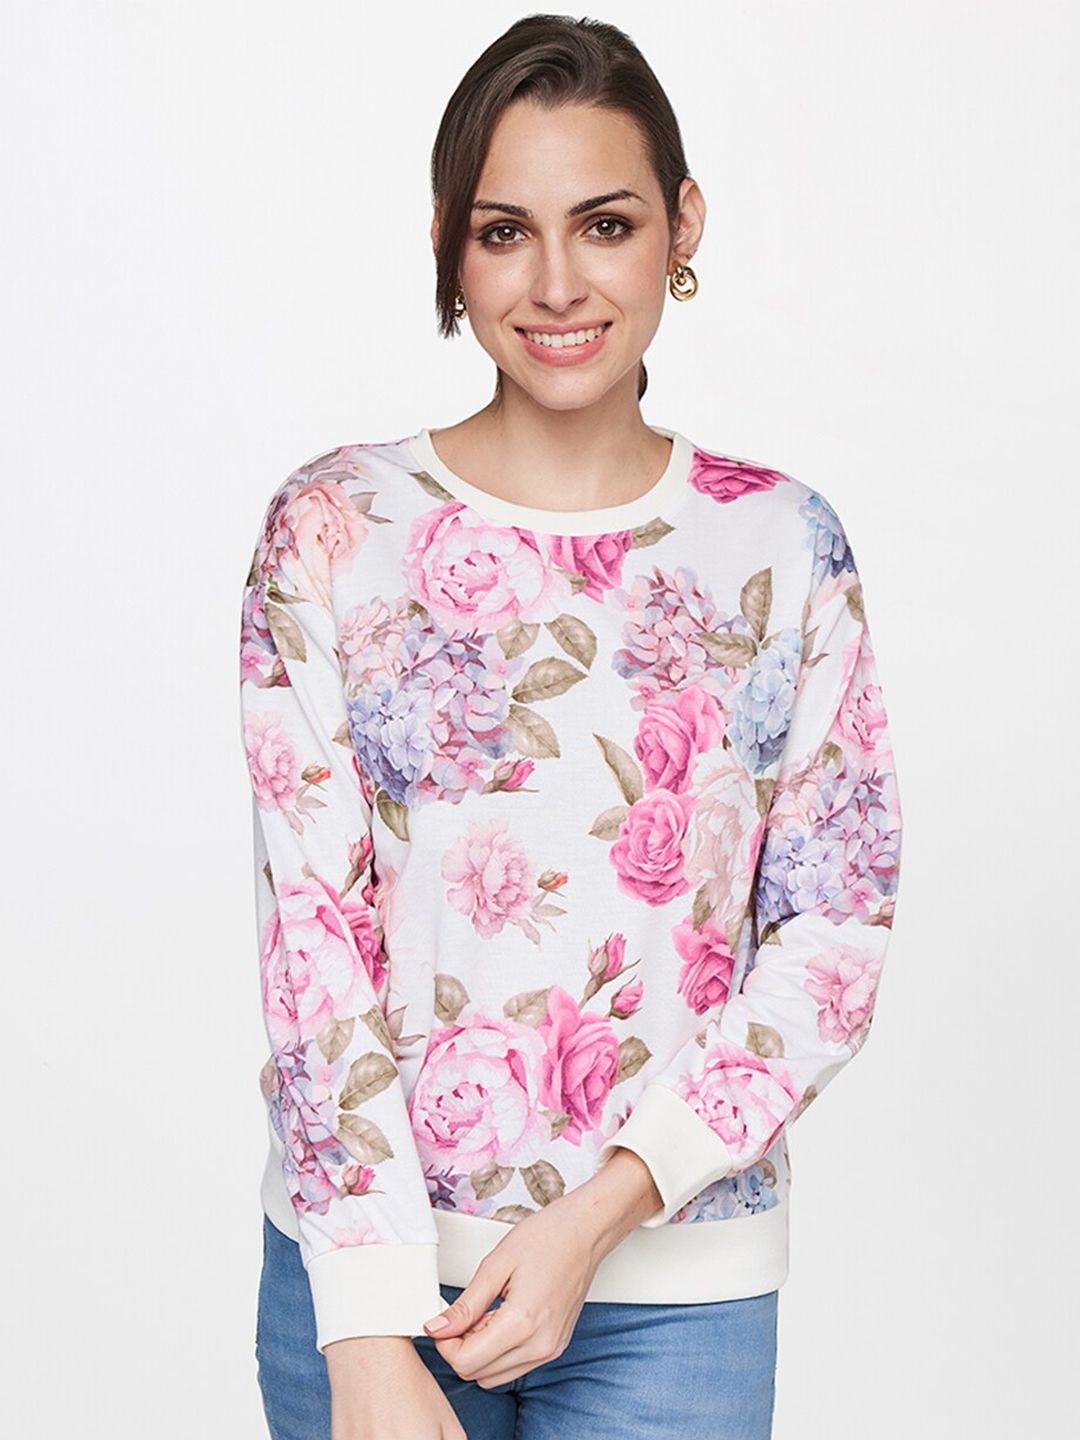 AND White & Pink Floral Print Top Price in India